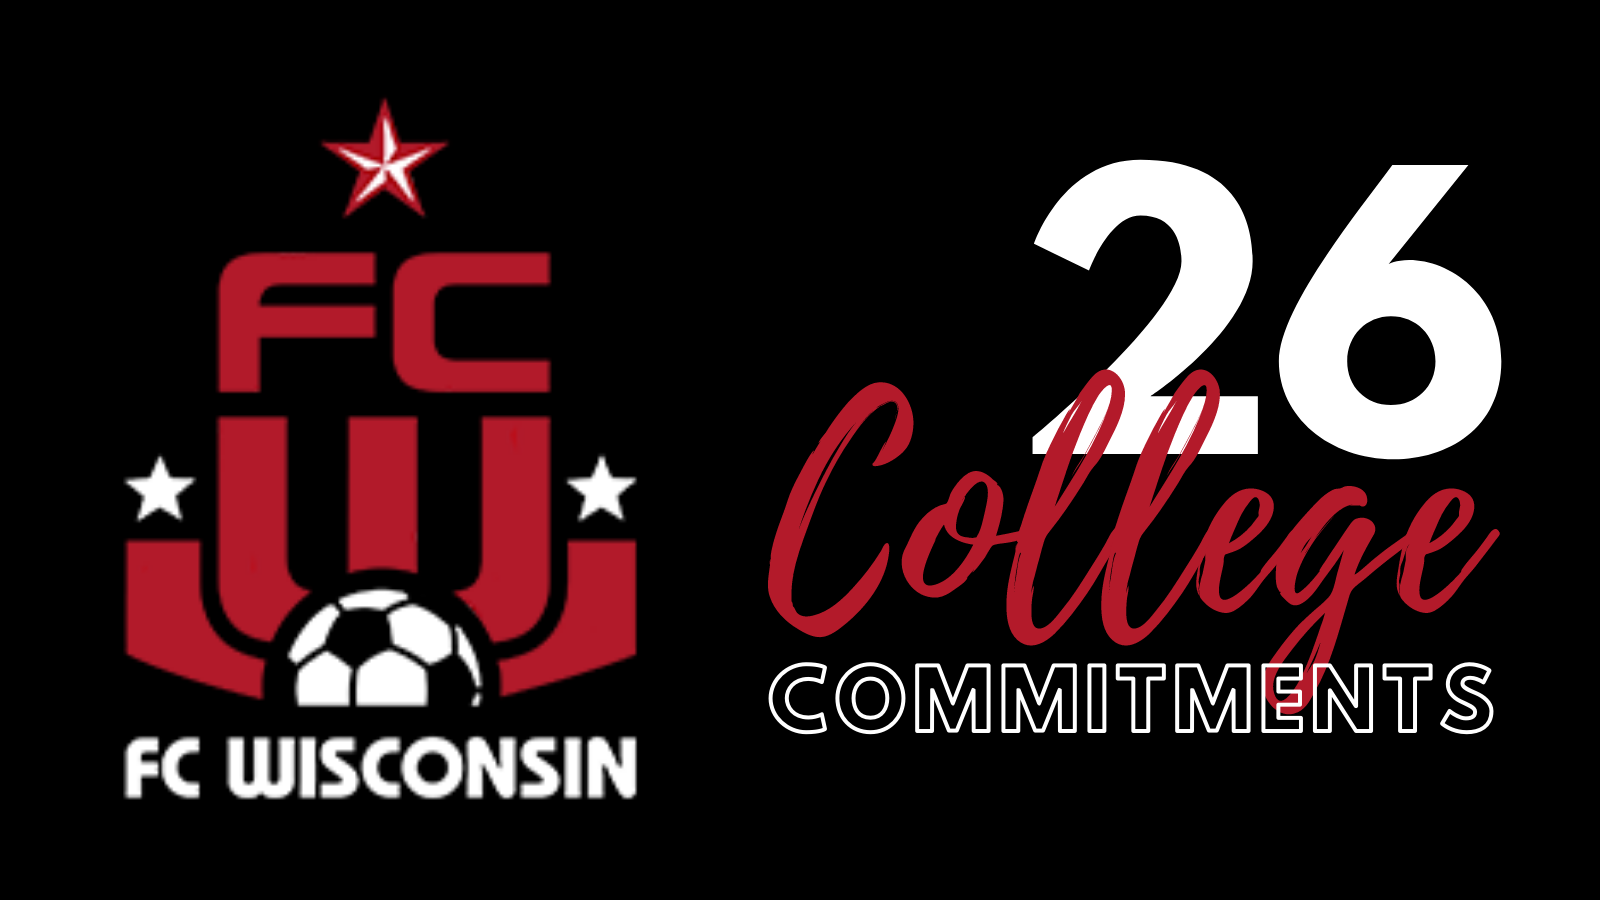 FC Wisconsin Announces 26 Boys College Commitments for Class of 2022